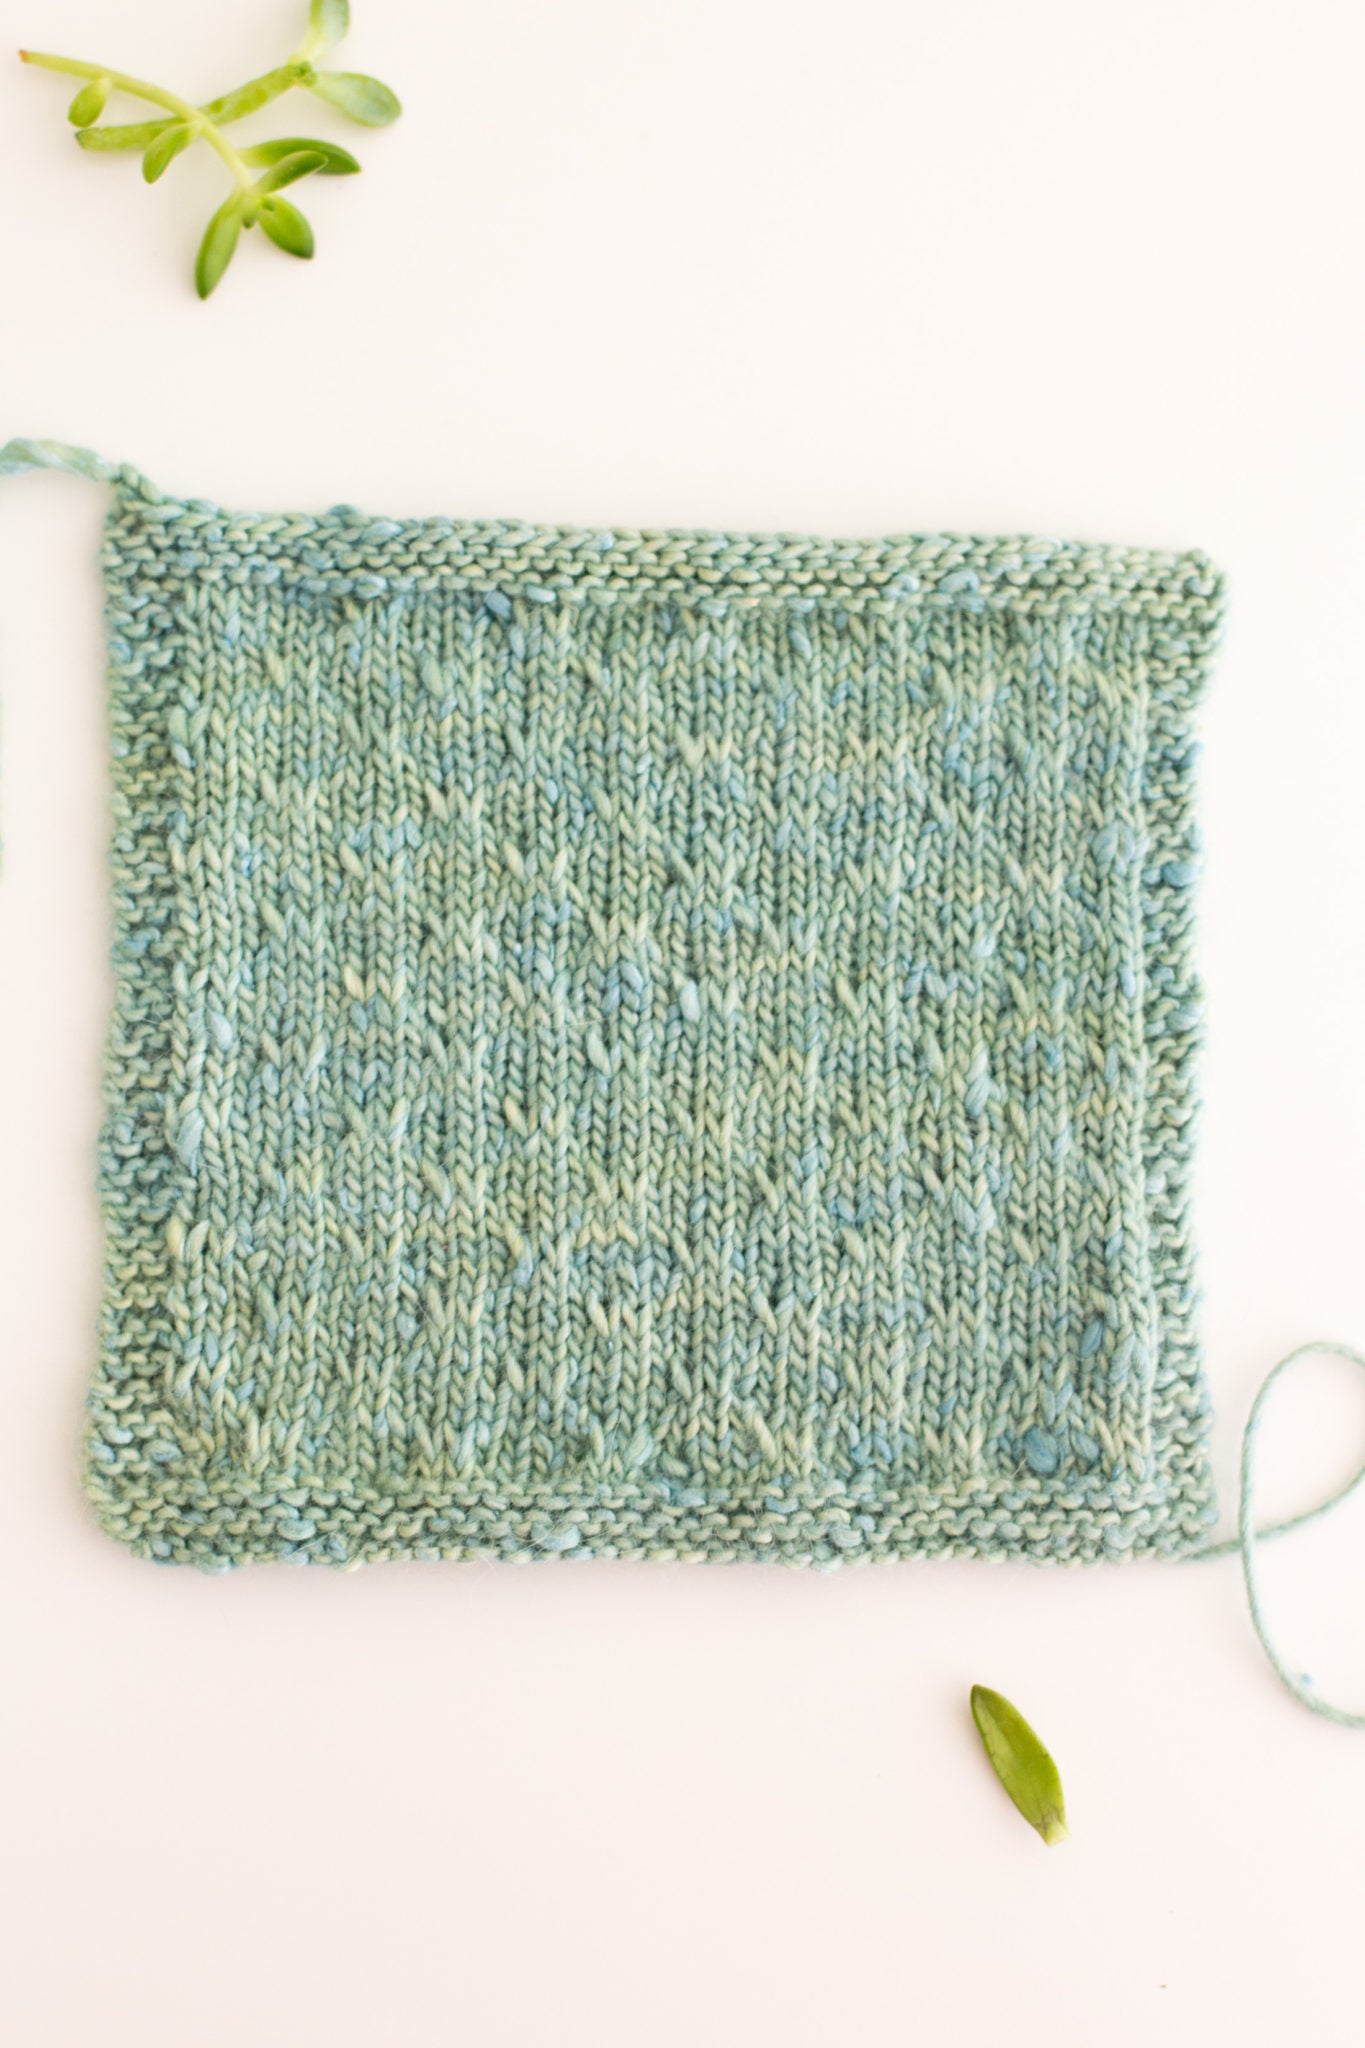 How to Knit the Staggered Slip Stitch